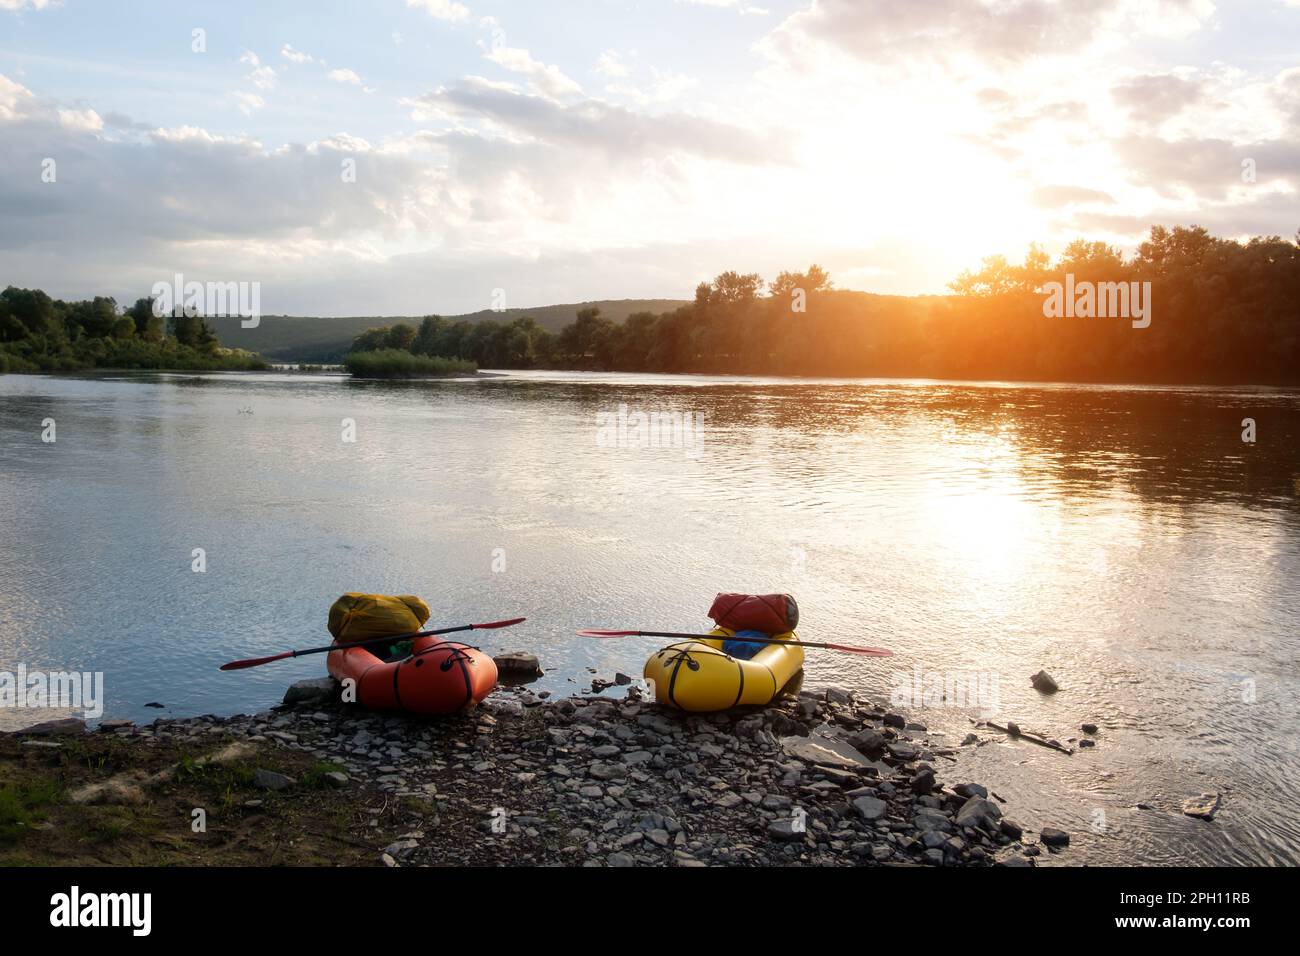 Orange and yellow packrafts rubber boats with padles on a sunrise Dnister river. Packrafting background. Active lifestile concept Stock Photo